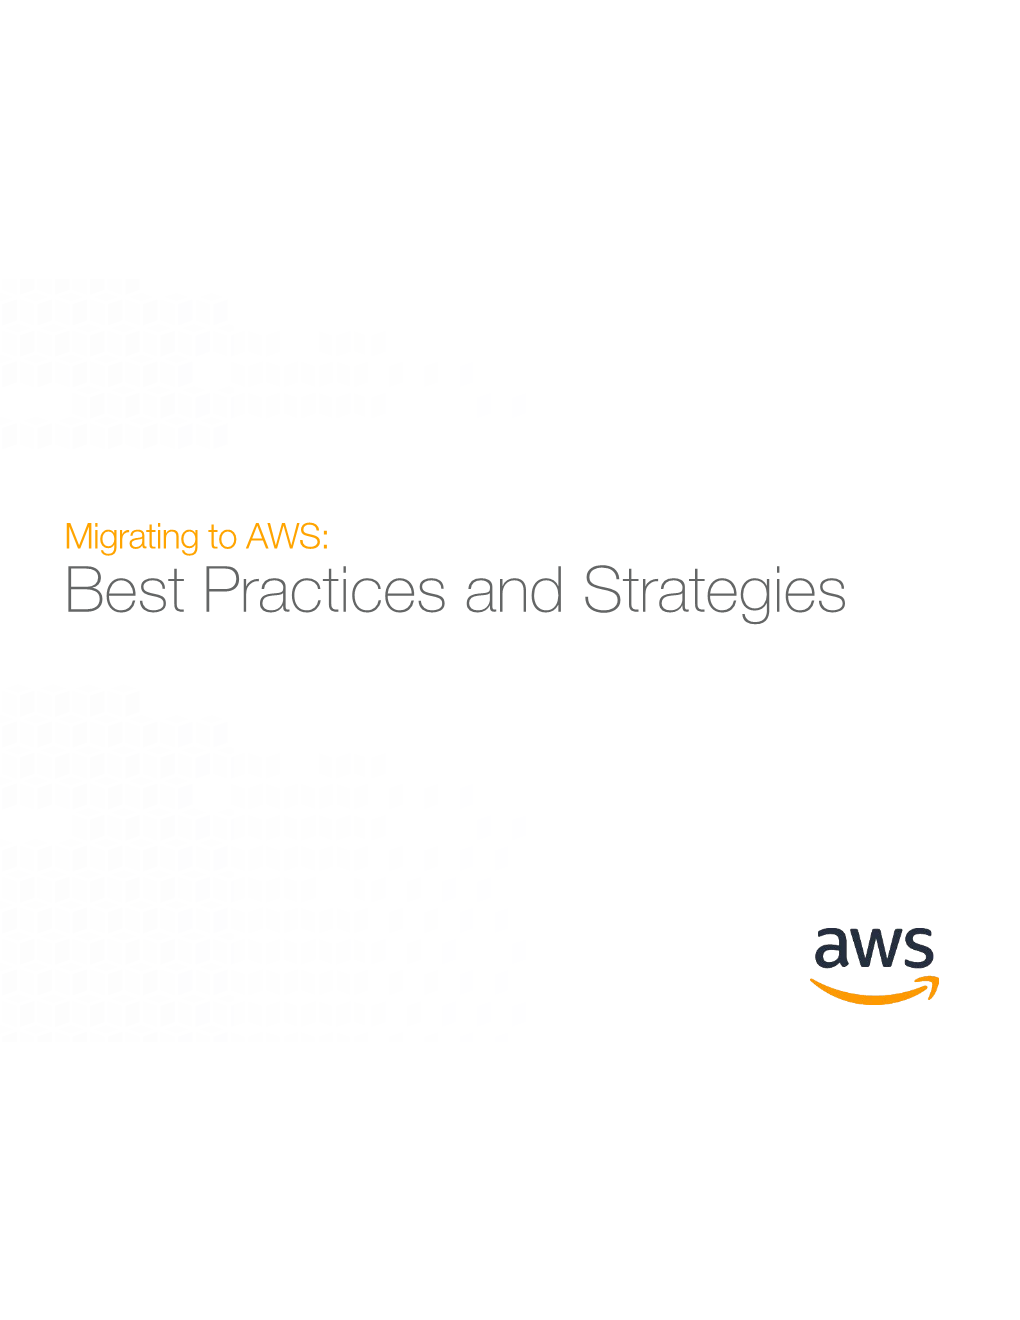 Best Practices and Strategies